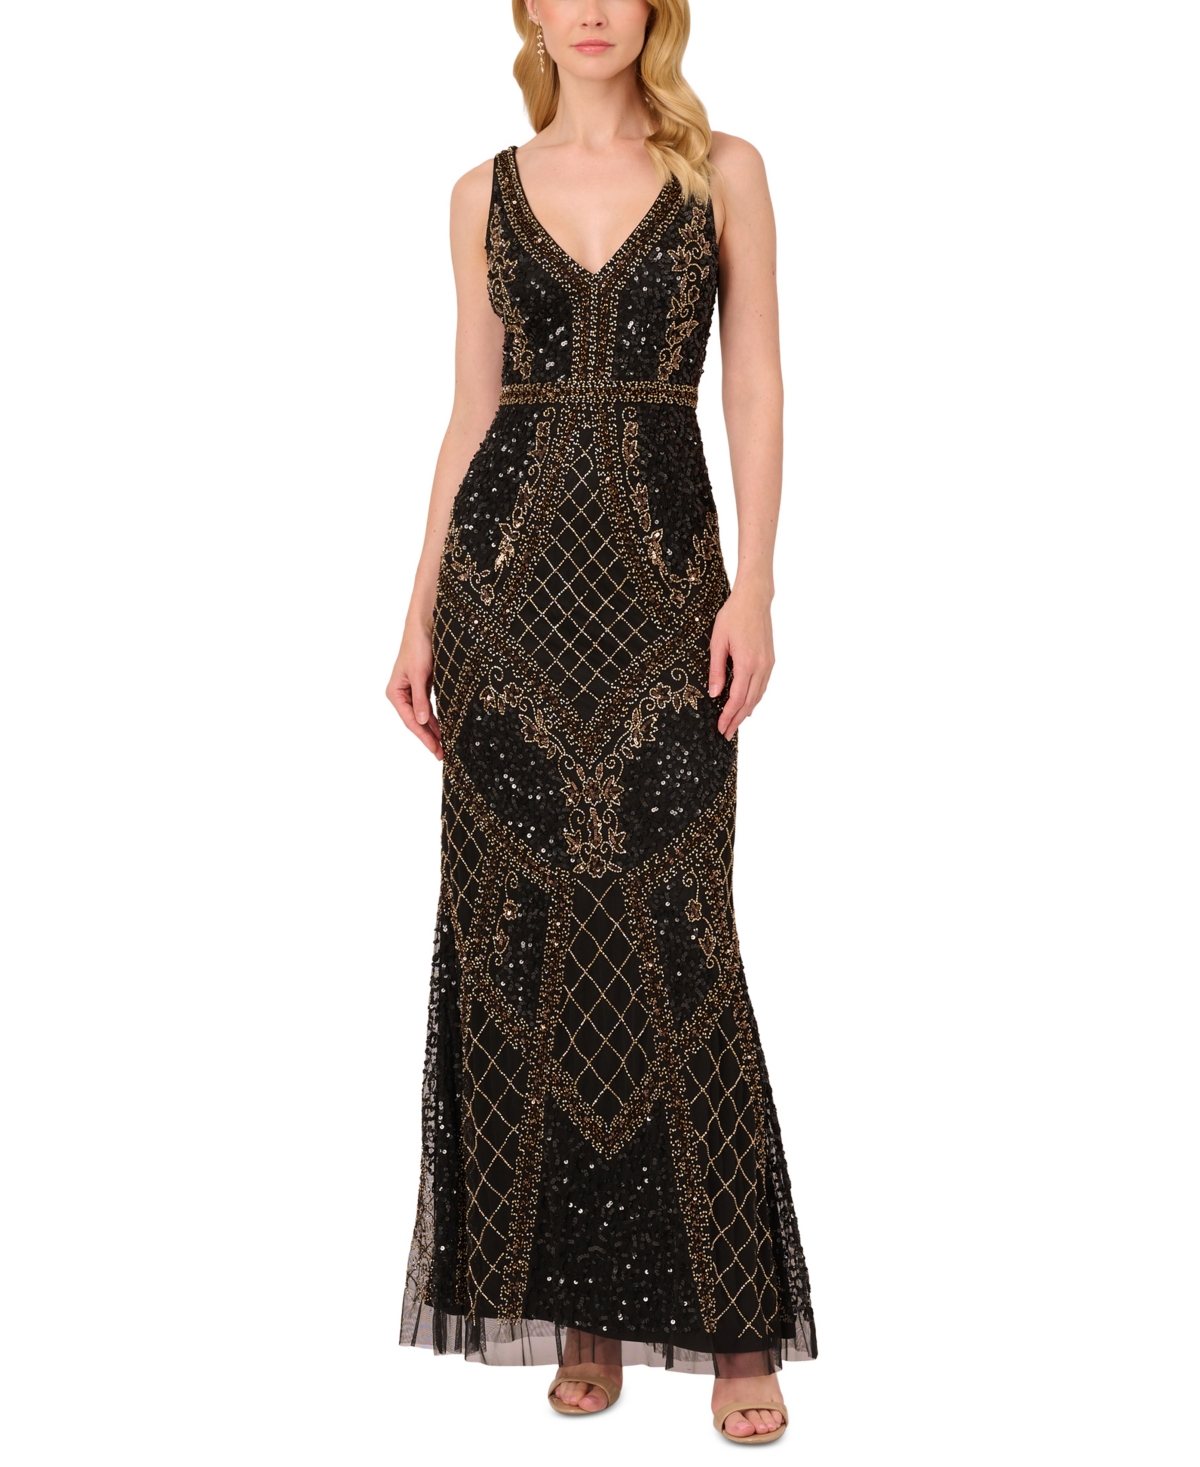 1920s Evening Dresses & Formal Gowns Adrianna Papell Womens Beaded Mesh Column Gown - Black Gold $349.00 AT vintagedancer.com